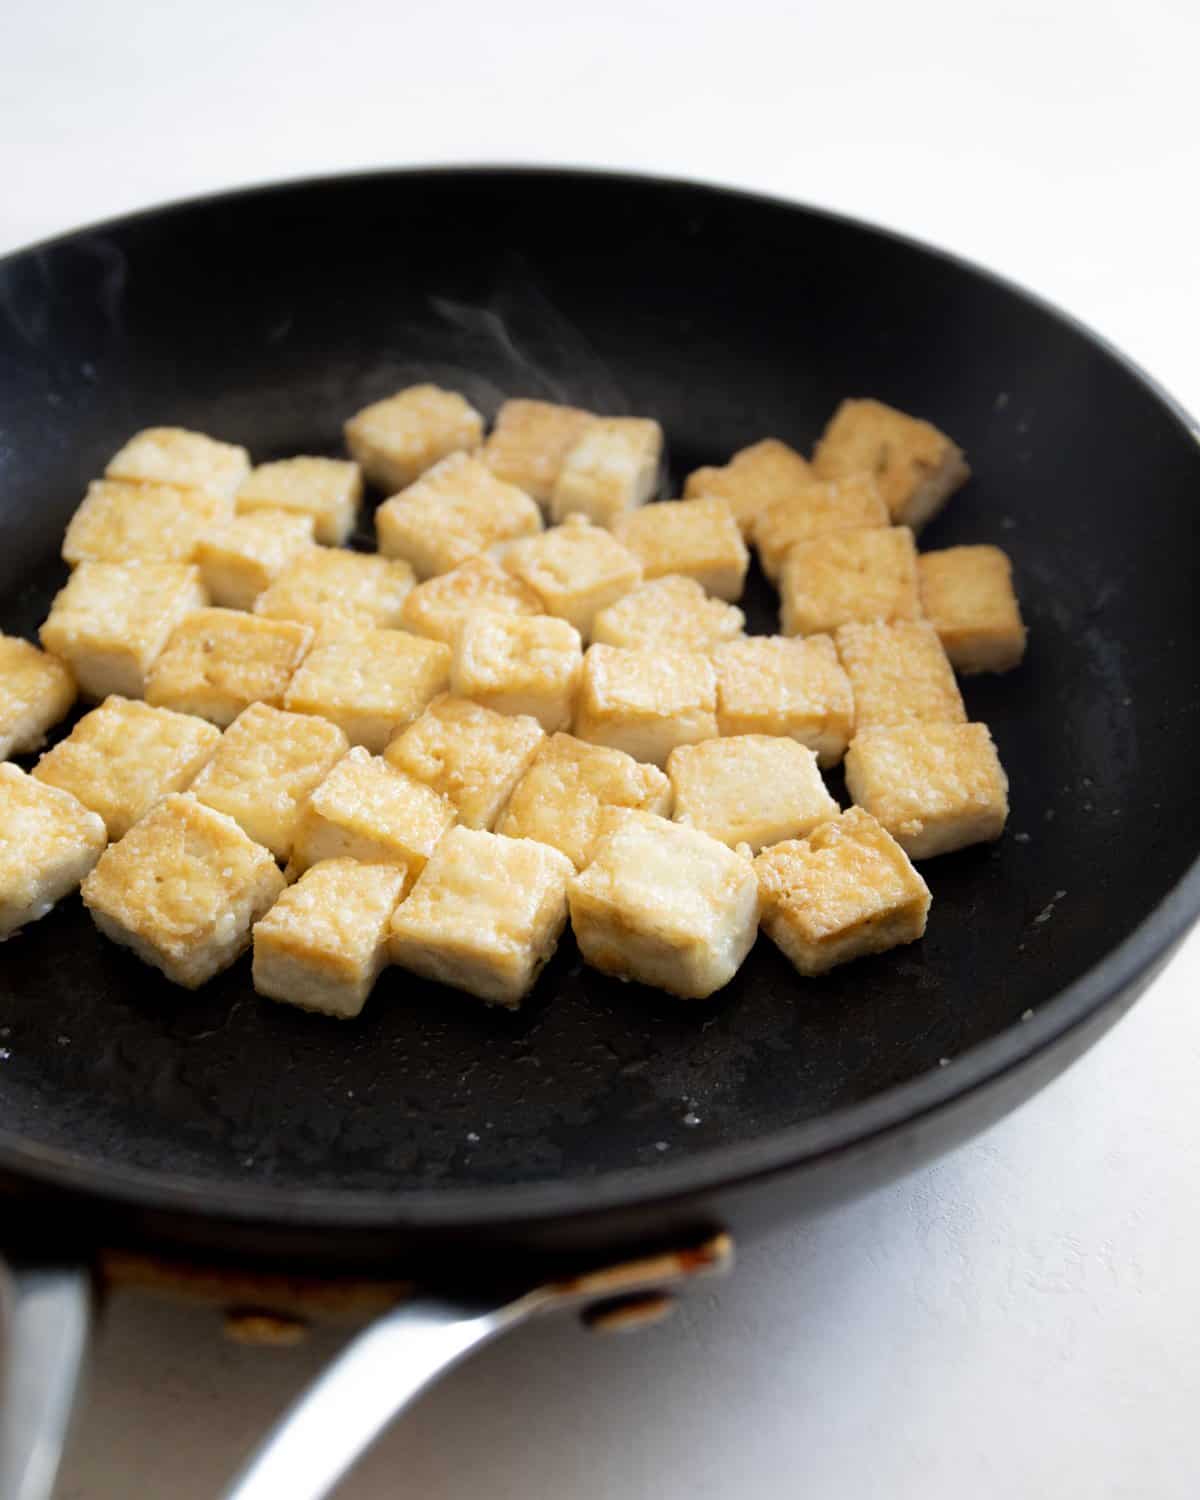 cooking cubes of tofu in a skillet